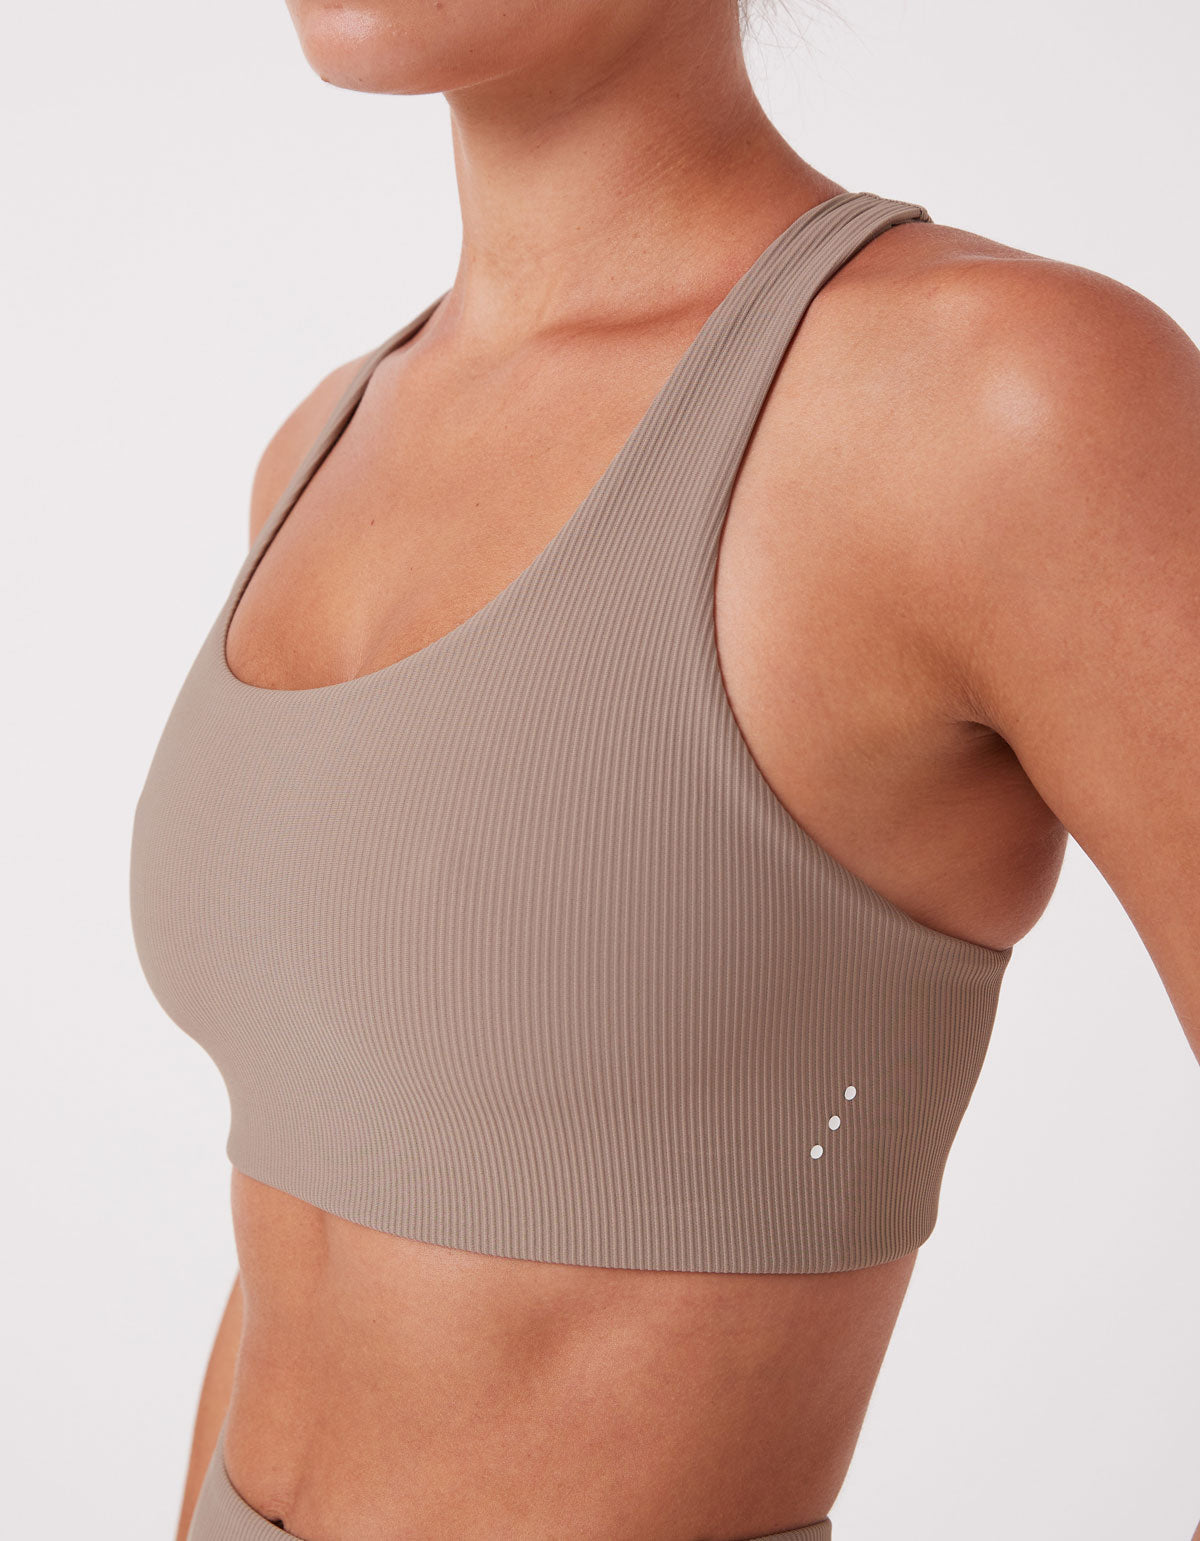 Rivemug, Sports Bra, 82% Polyester 18% Spandex Best for A to C